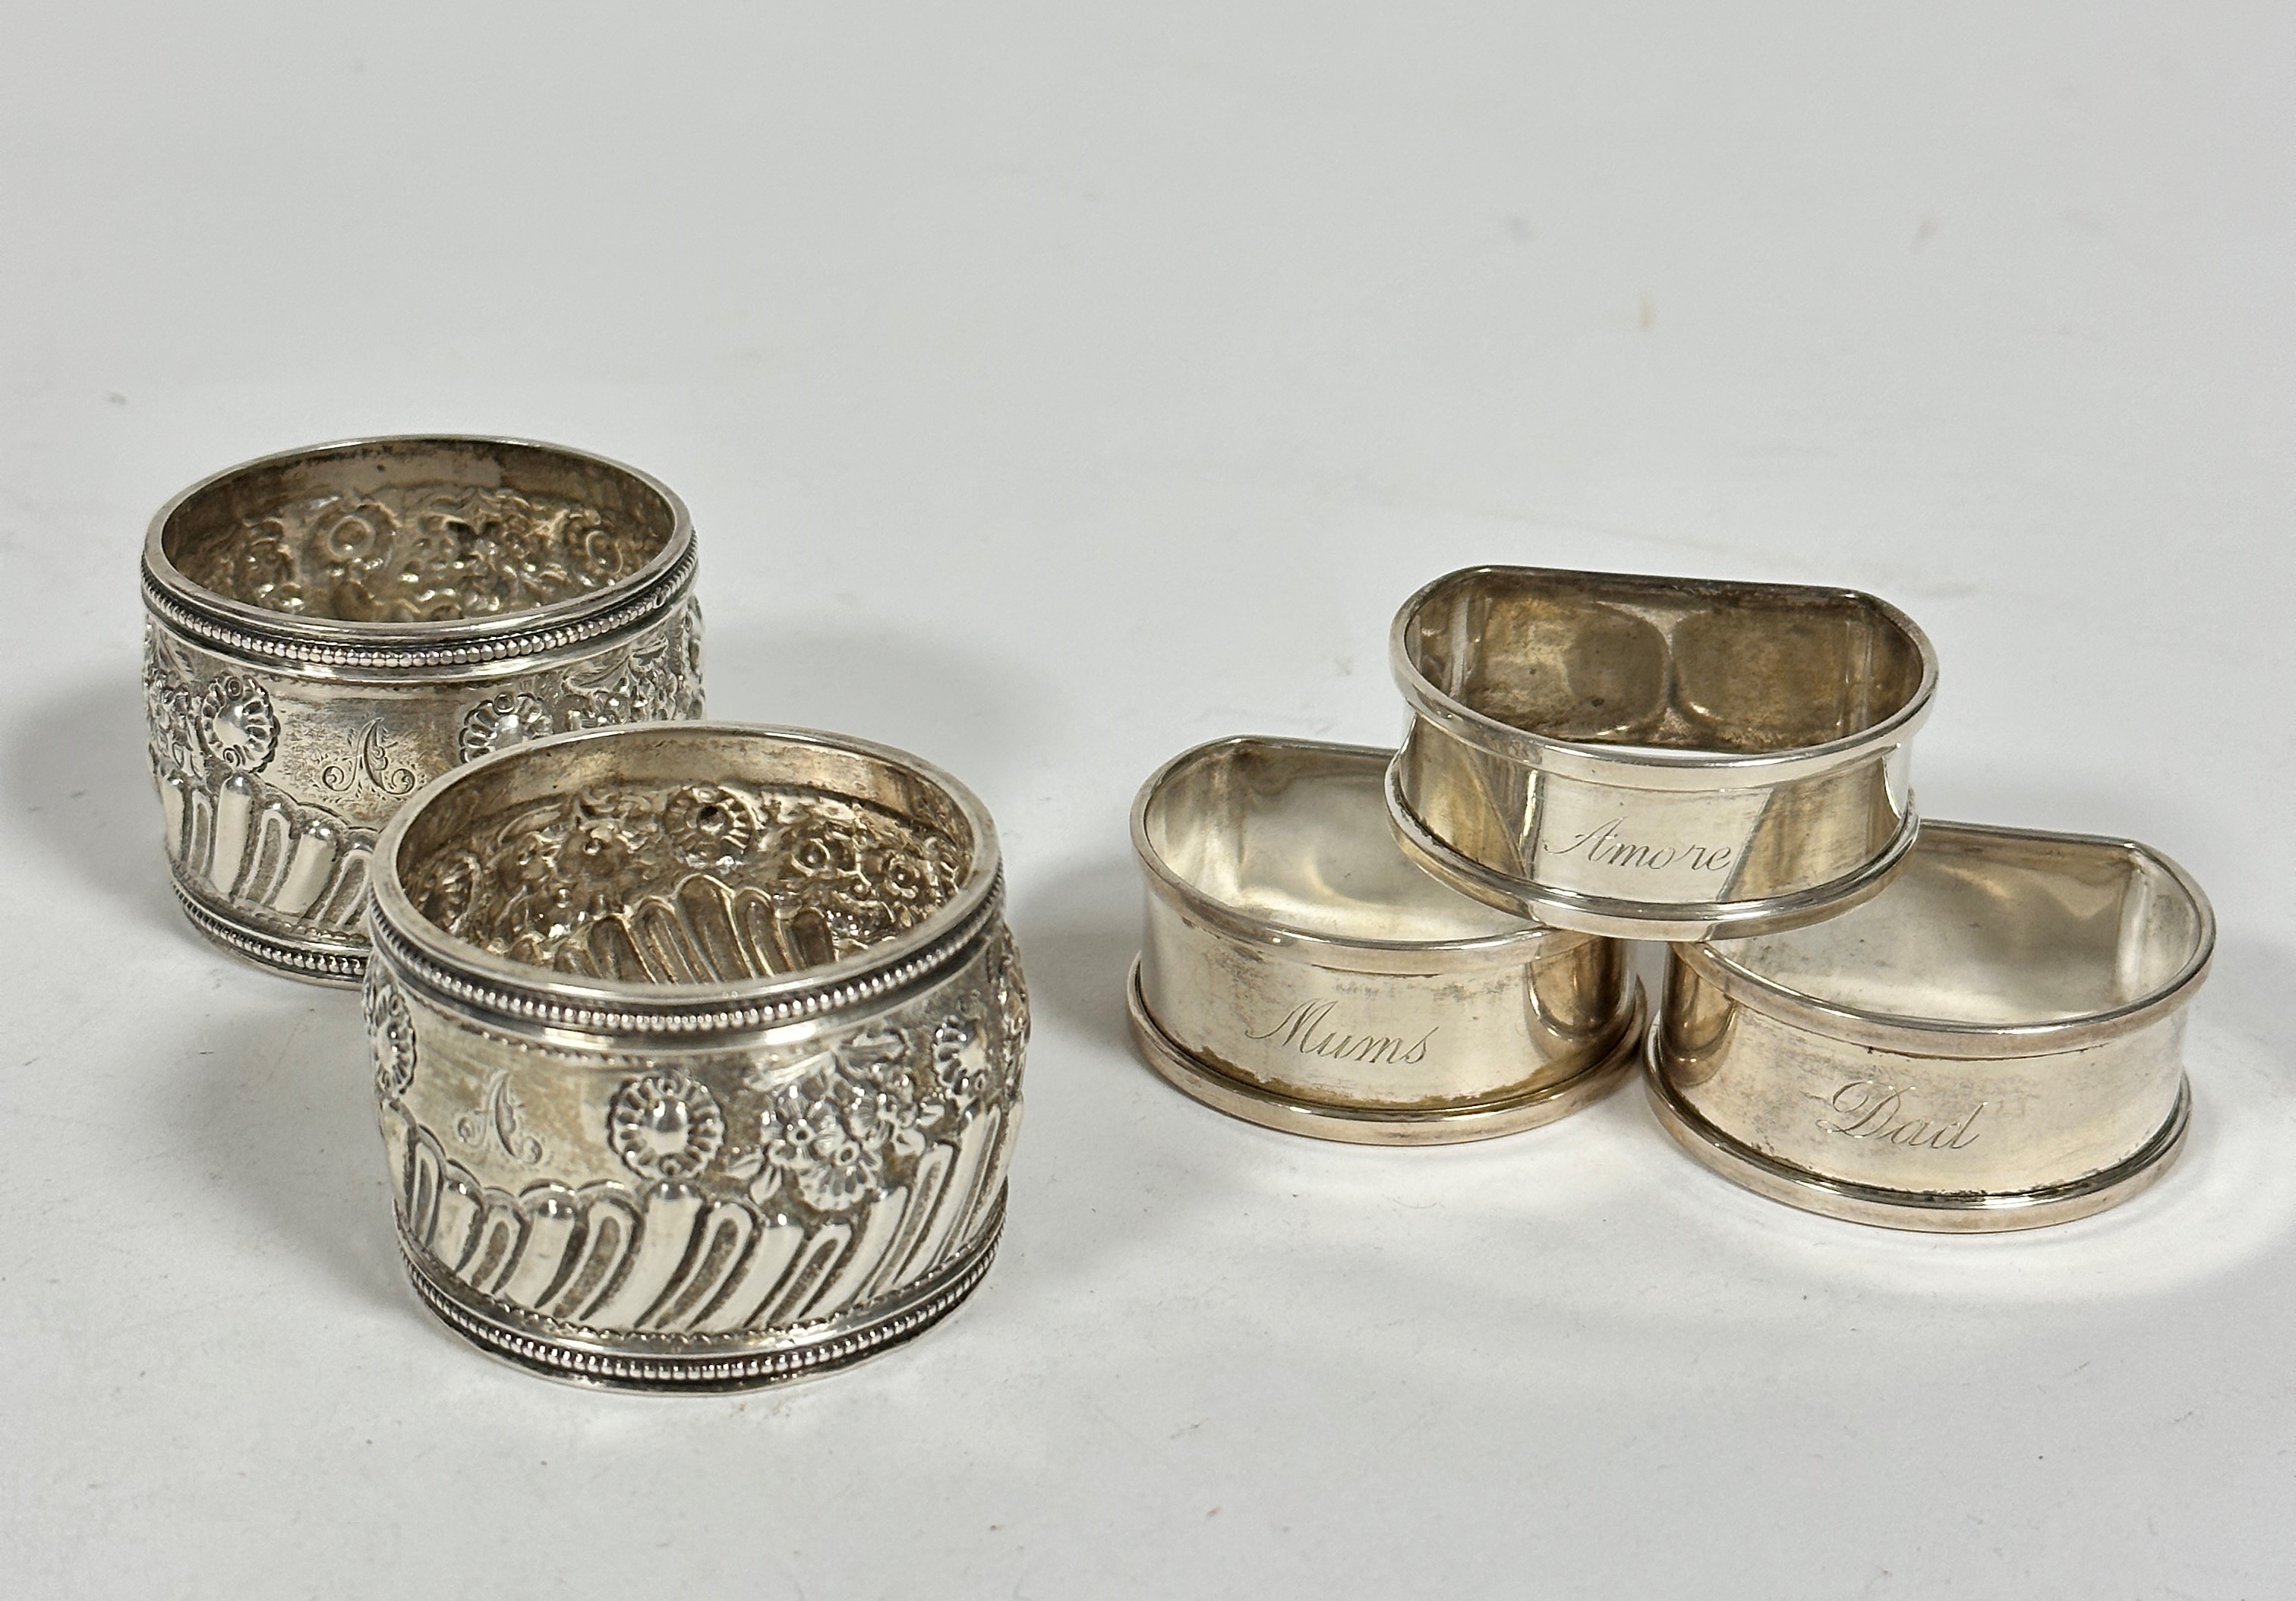 A pair of London silver chased circular napkin rings with beaded borders and stylised floral